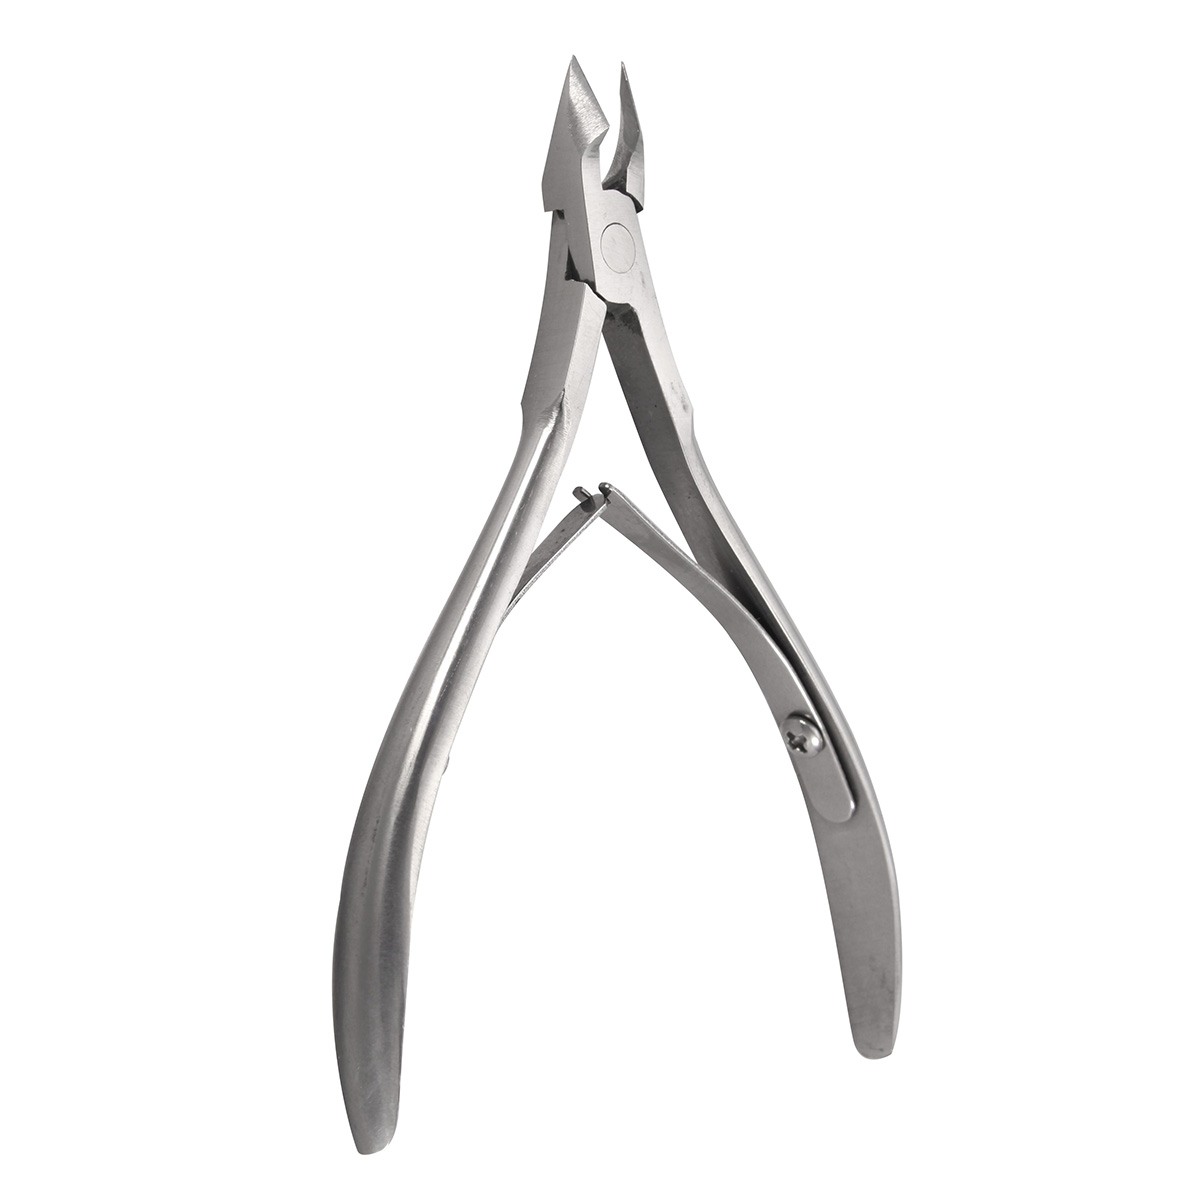 Stainless Steel Dead Skin Cuticle Scissors Remover Cleaner Nail Art Pedicure Nipper Manicure Tool 